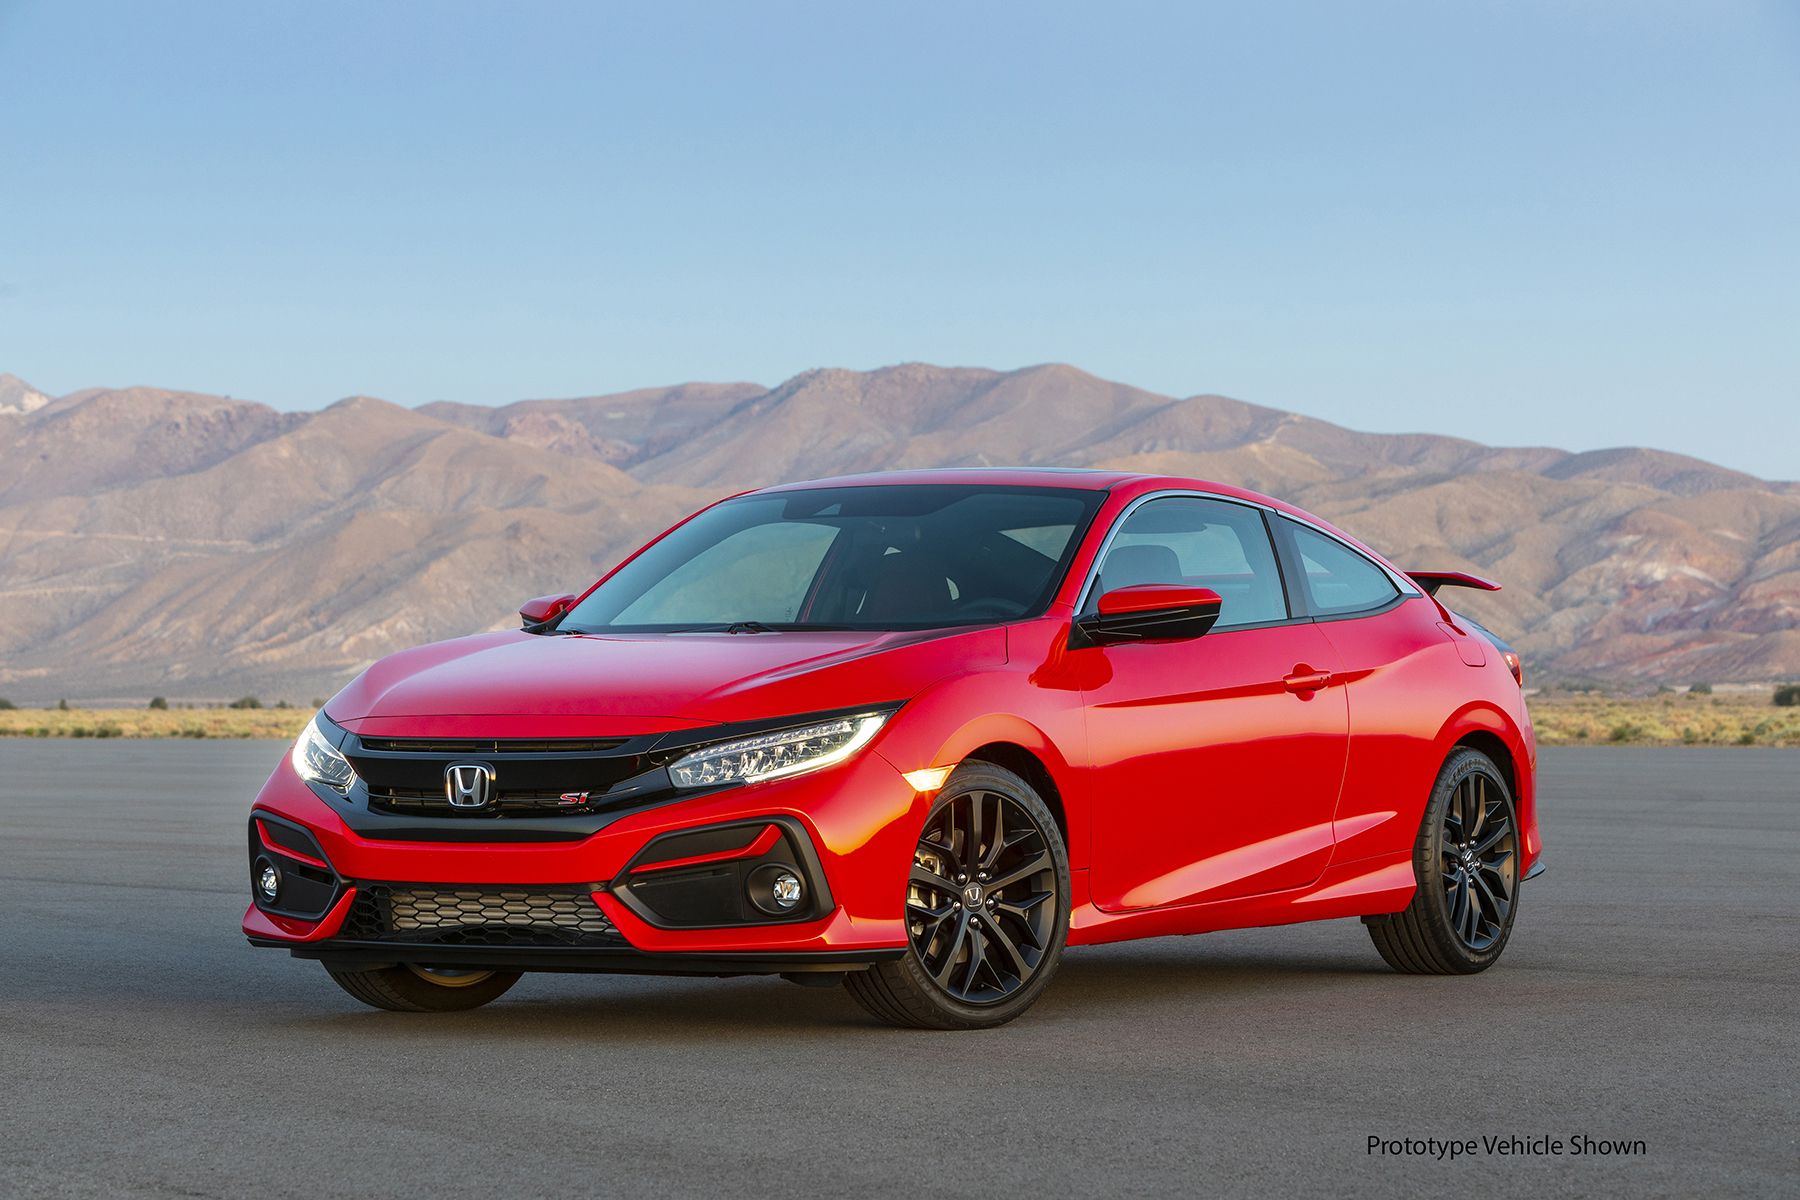 A 20-Year-Old 2000 Honda Civic Si Just Sold for $50,000